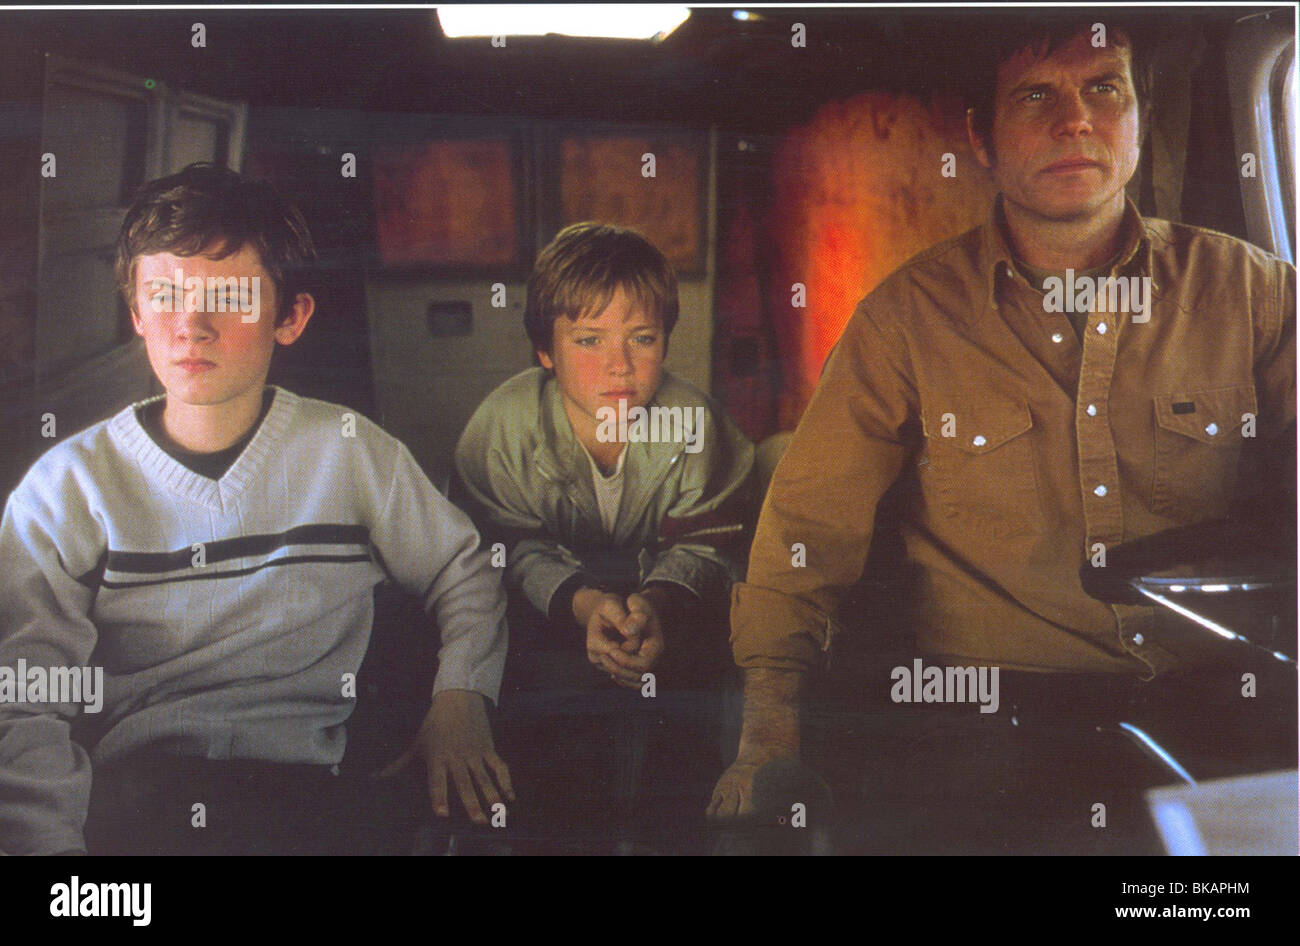 FRAILTY (2001) MATTHEW O'LEARY, JEREMY SUMPTER, BILL PAXTON FRLT 005 FOH MOVIESTORE COLLECTION LTD Stock Photo